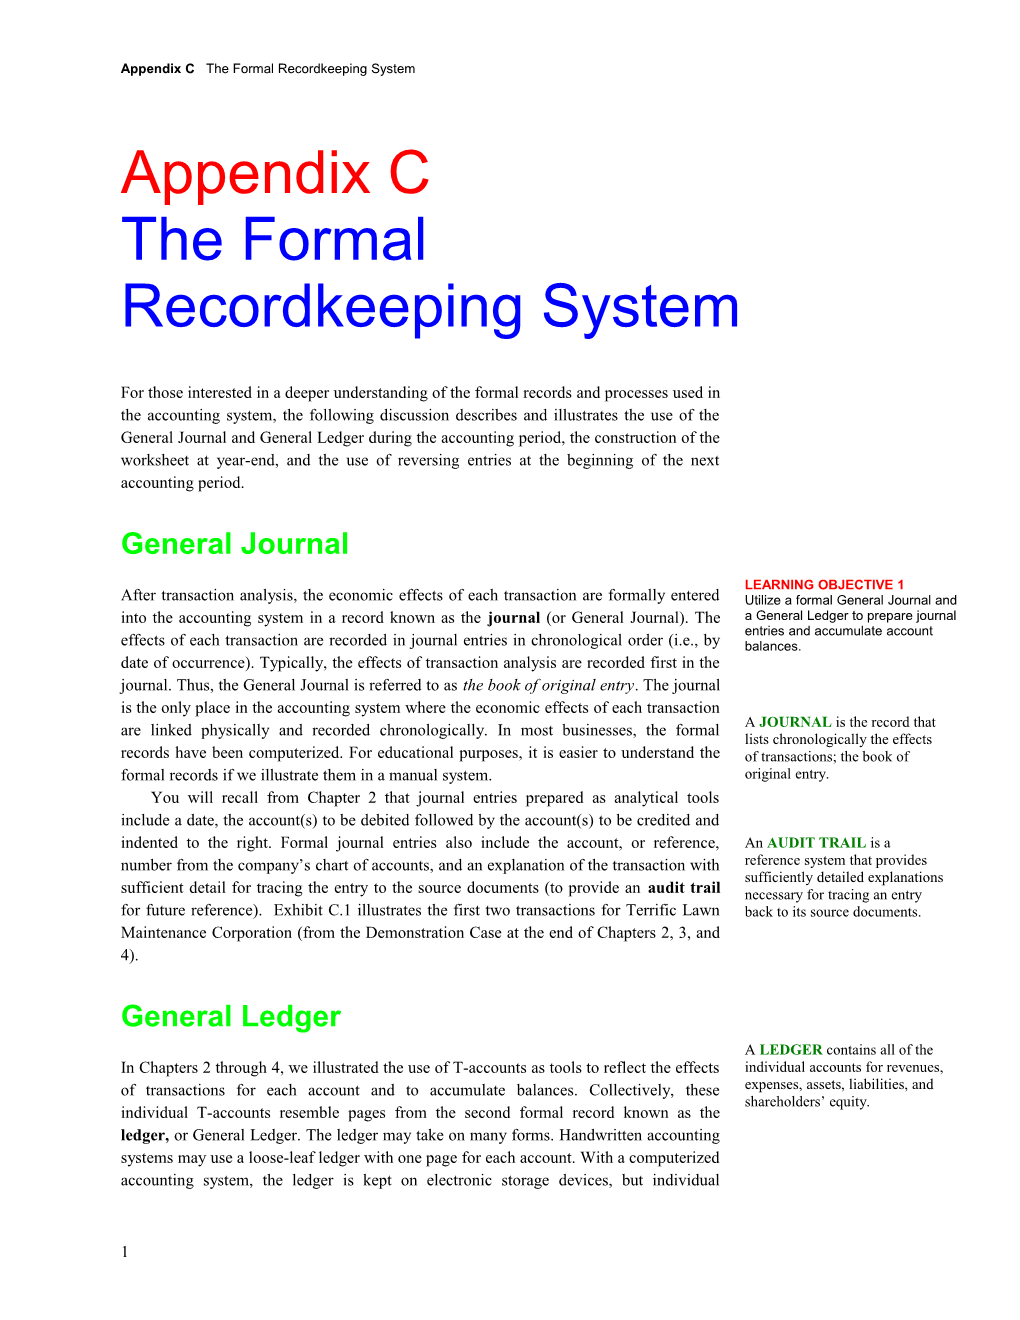 Appendix C the Formal Recordkeeping System